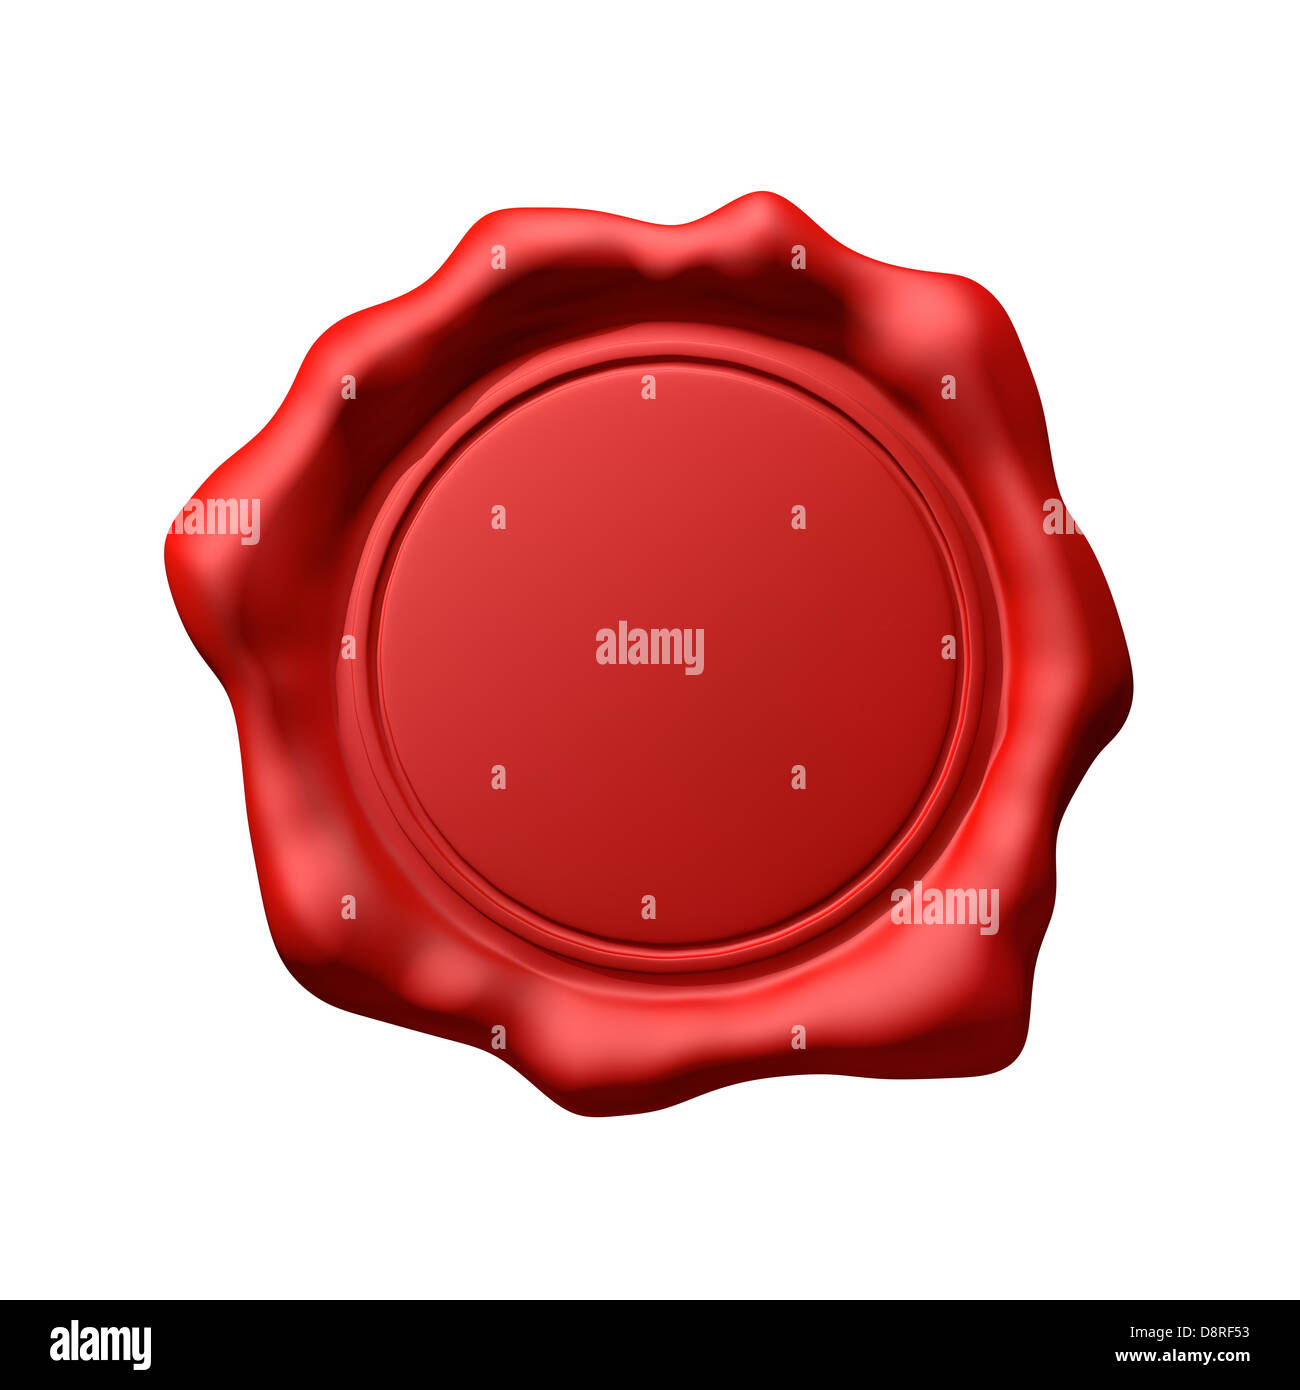 Red Wax Seal 3 - Isolated Stock Photo - Alamy